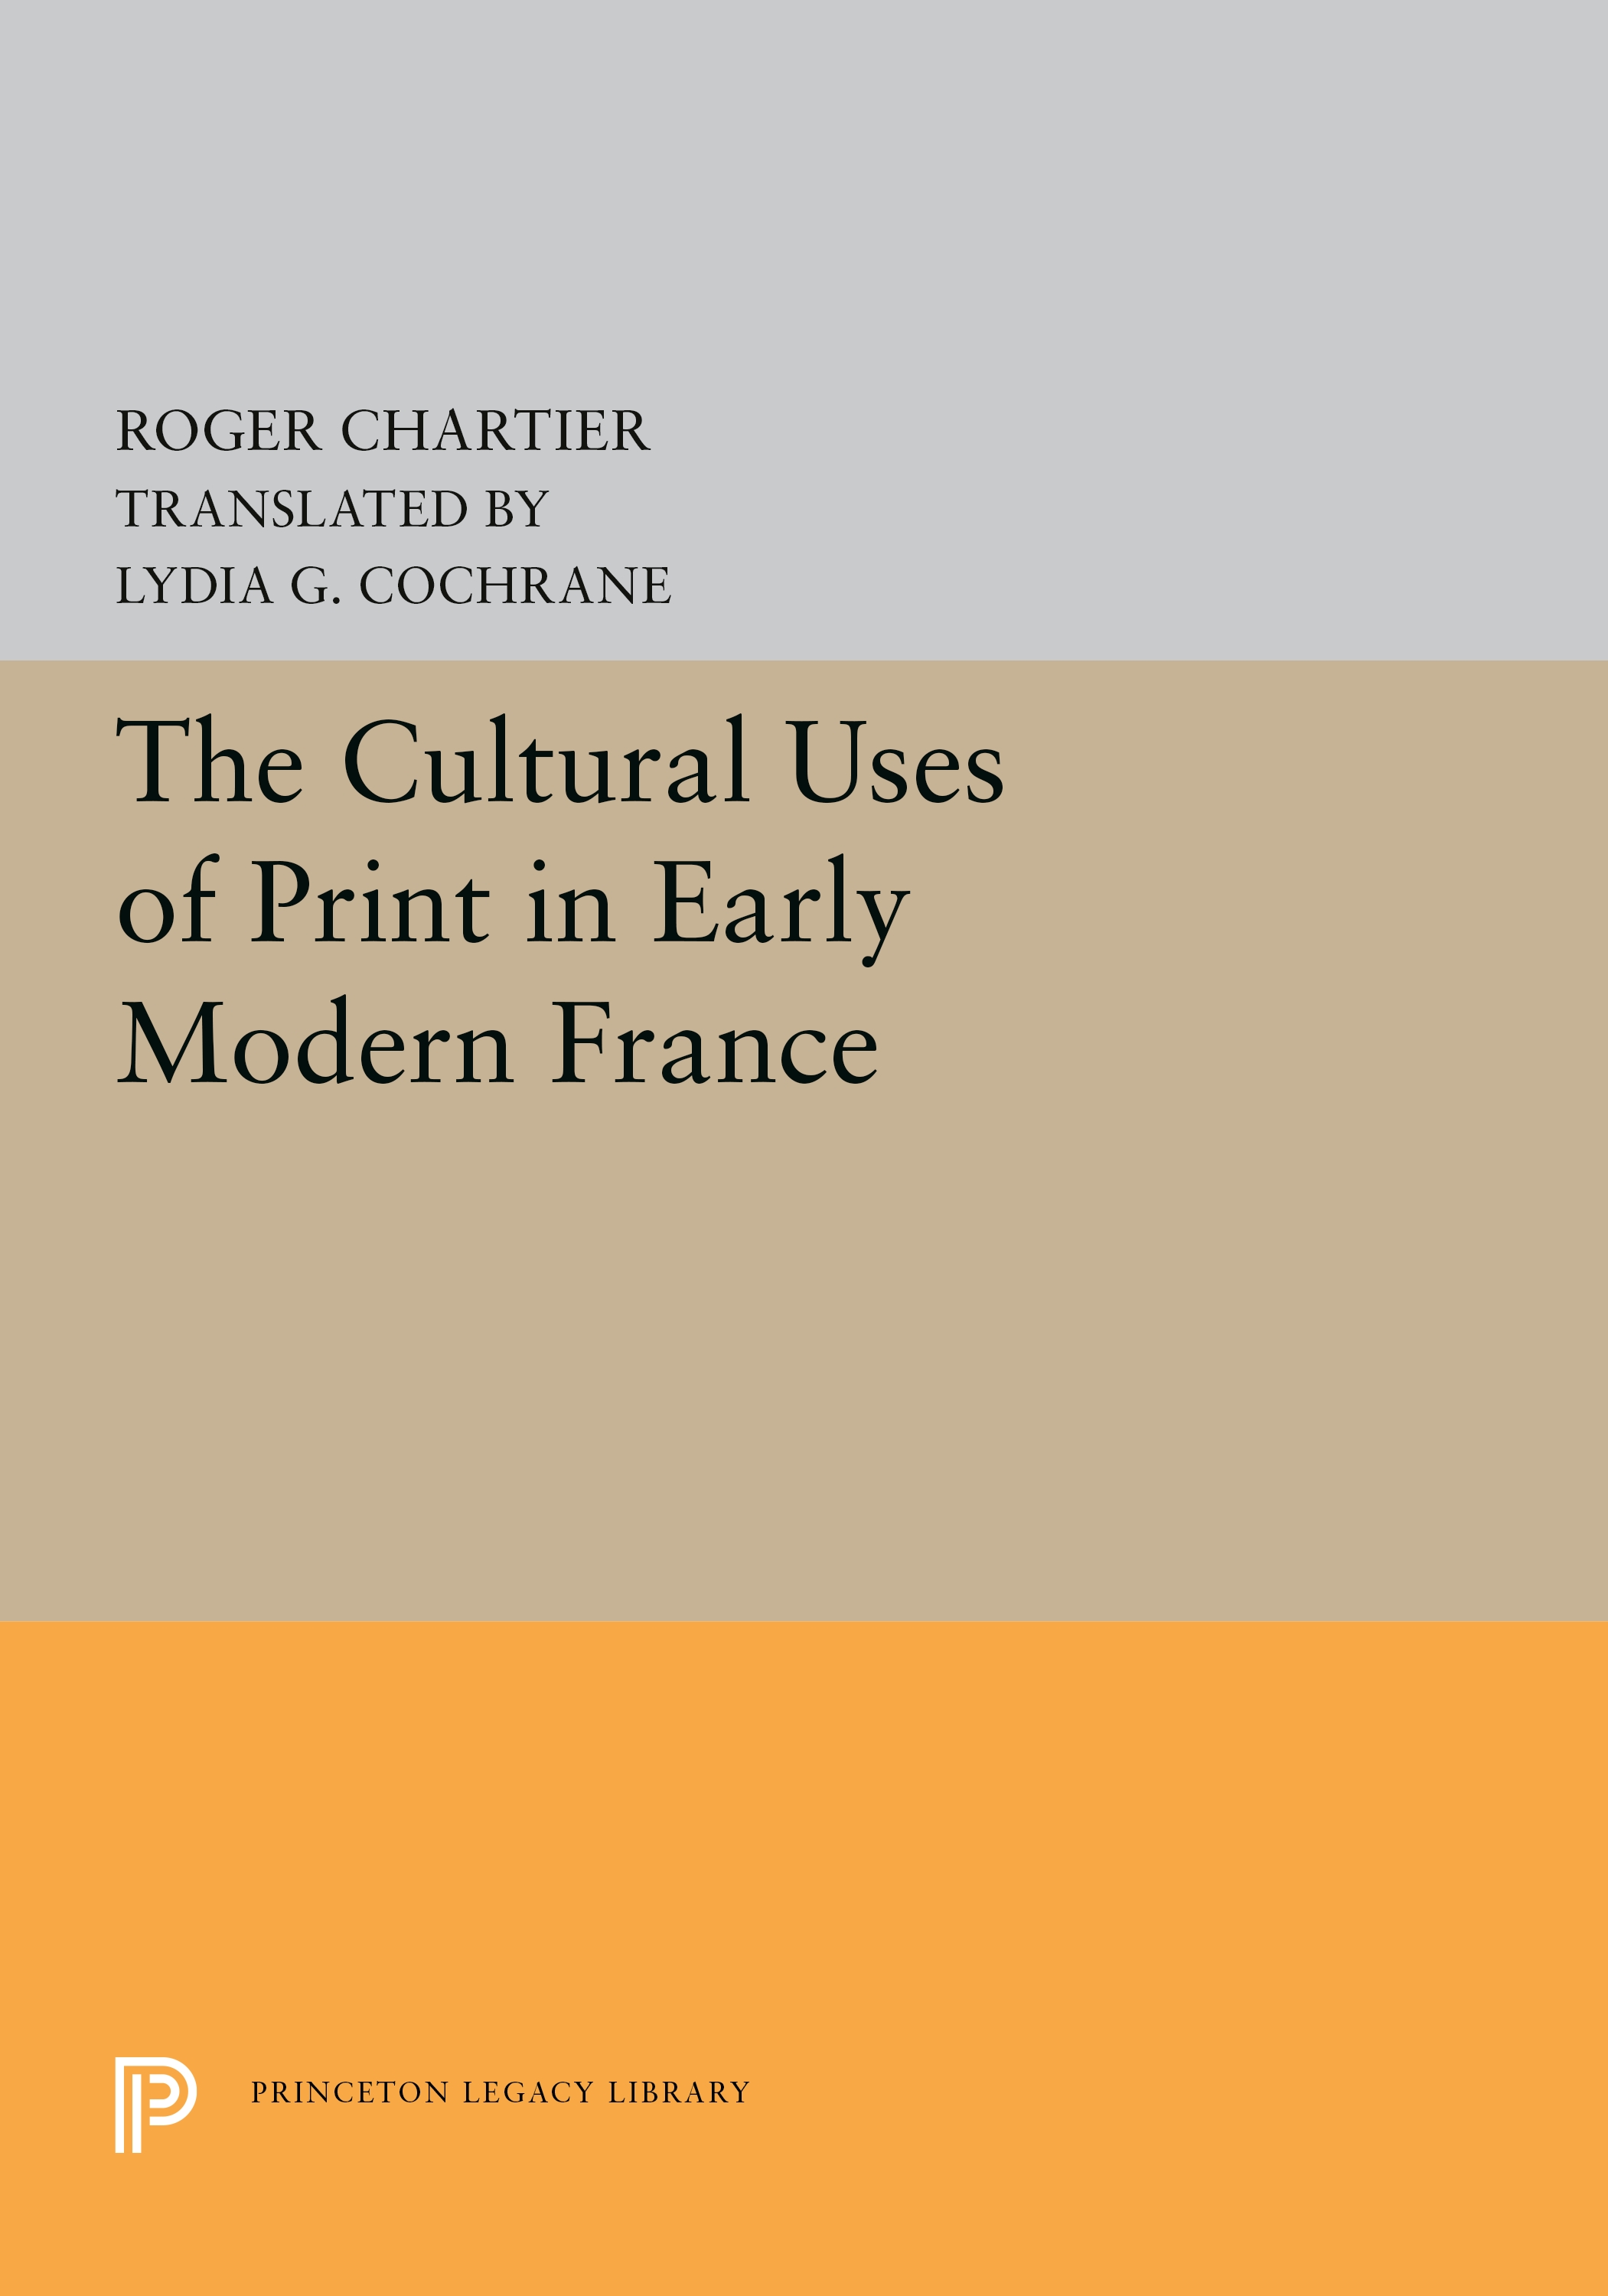 The cultural uses of print in early modern France